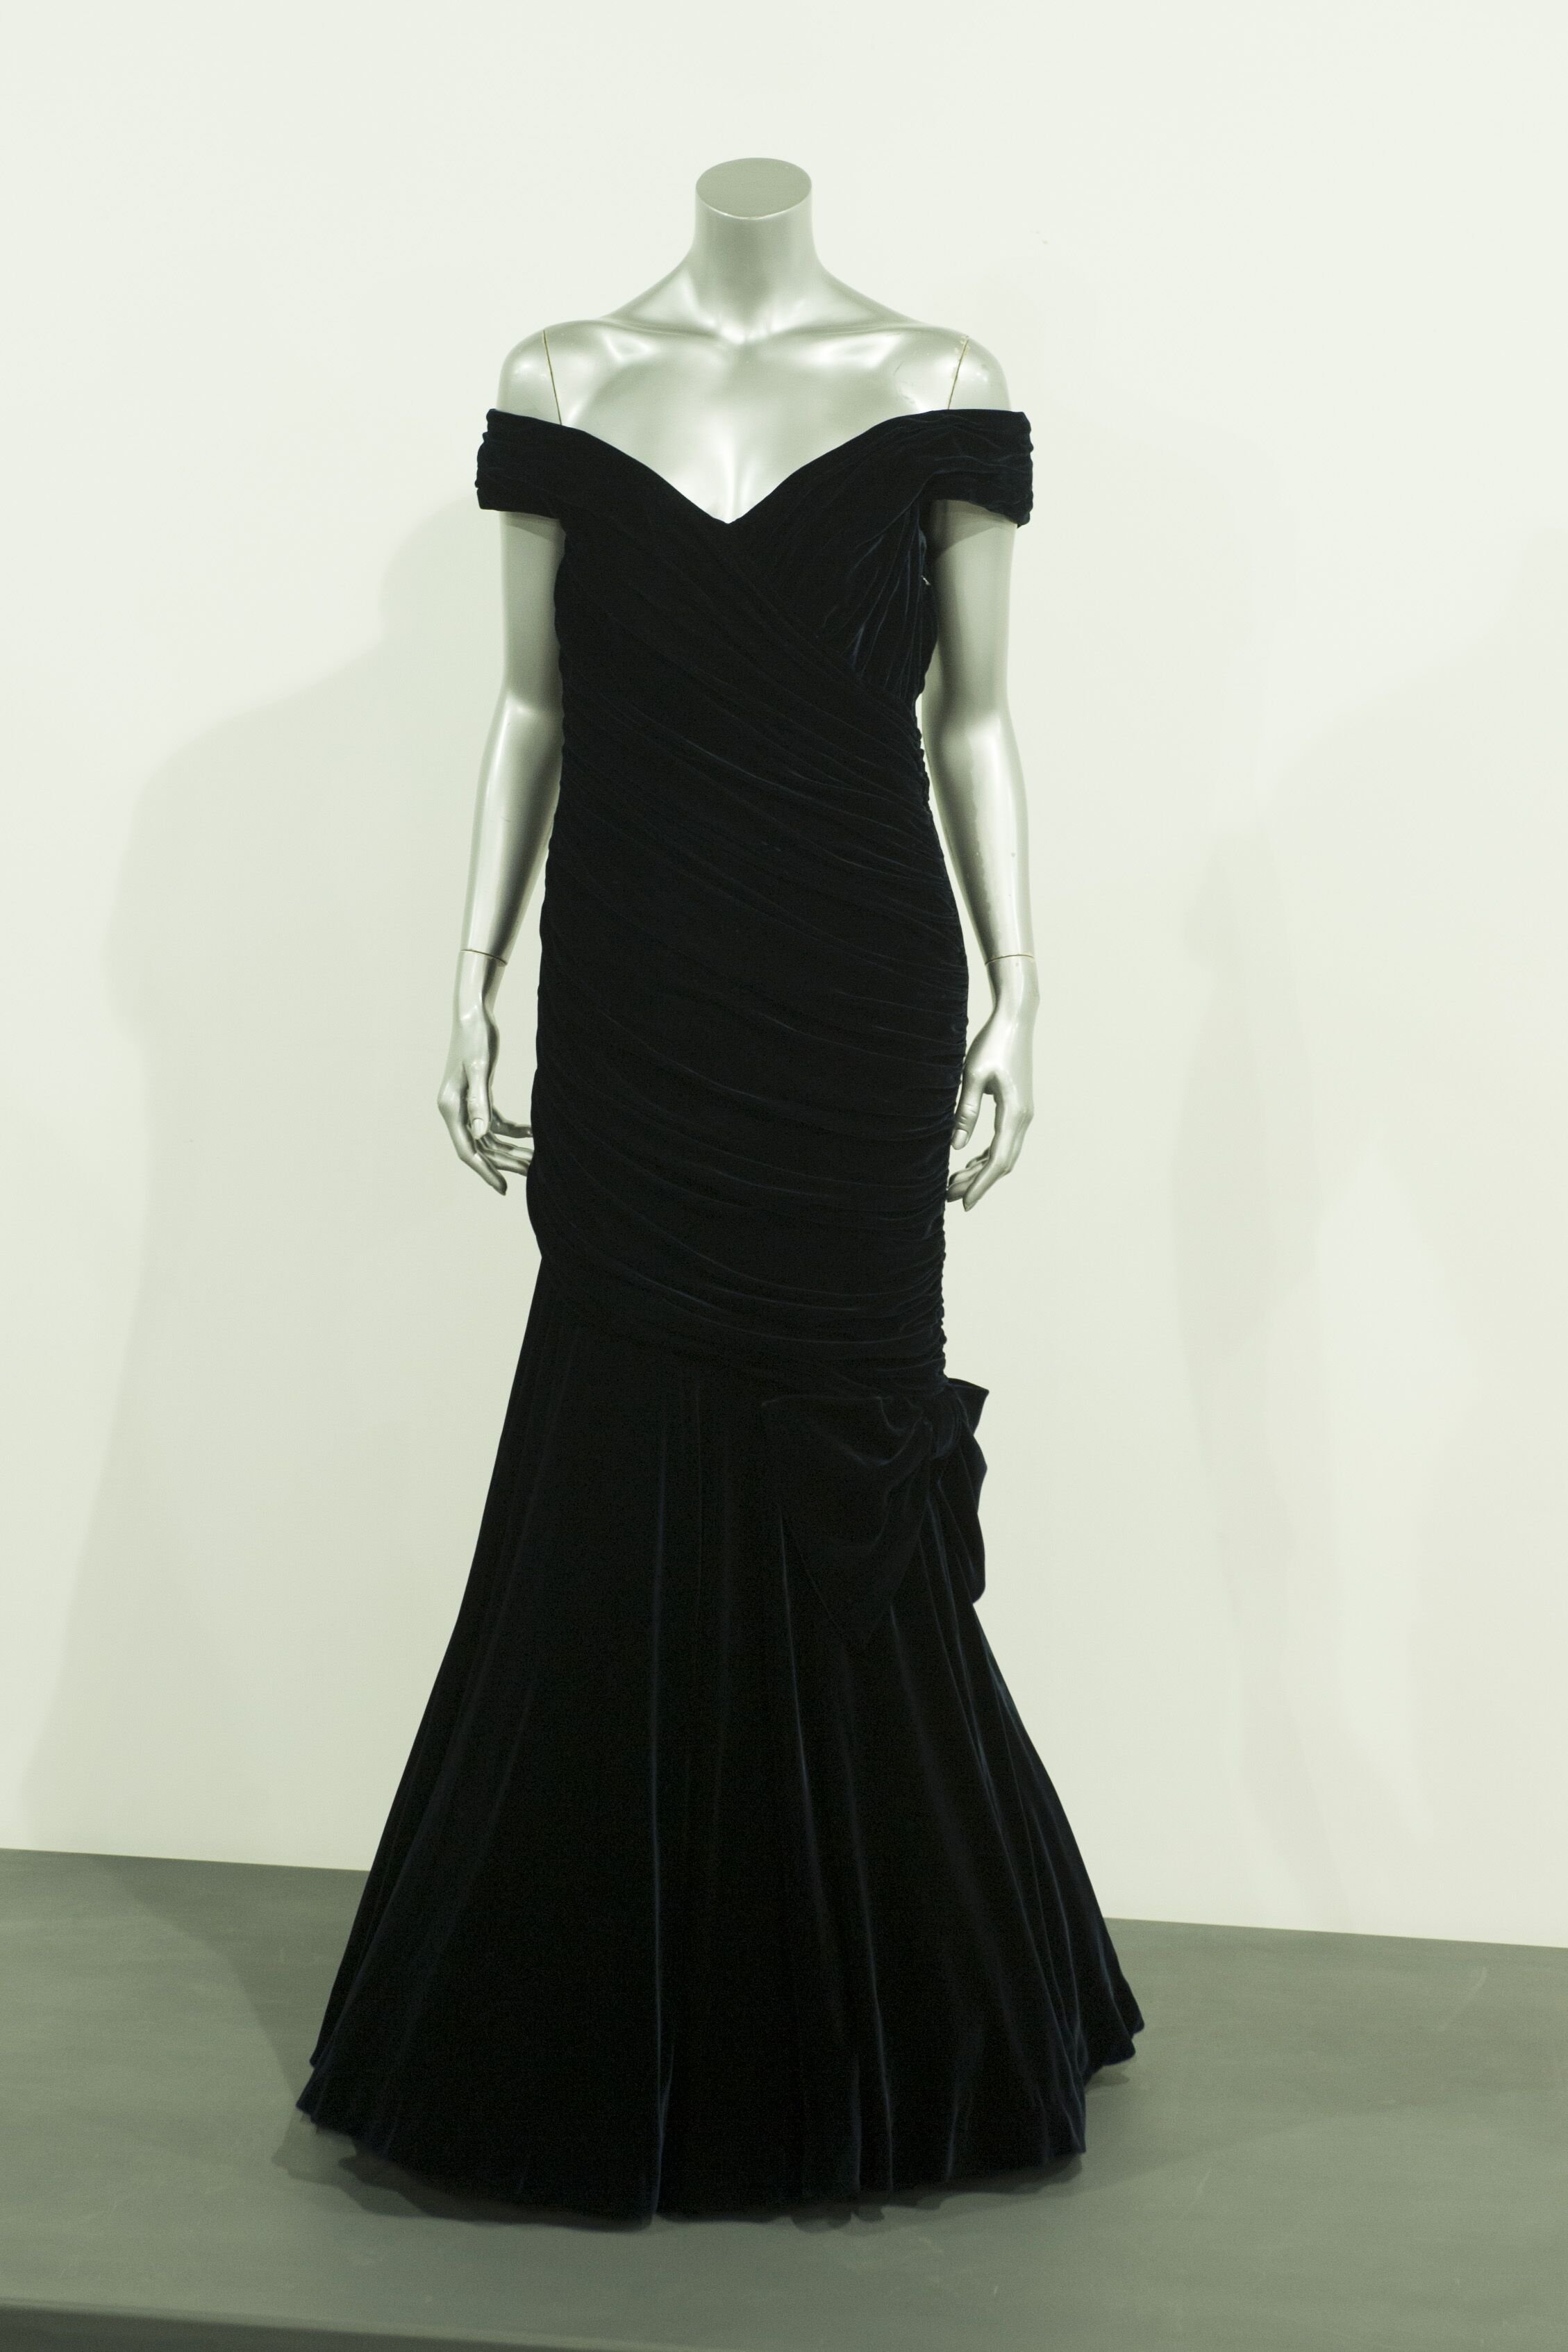 Victor Edelstein Midnight Blue Velvet Gown worn by Princess Diana in November 1985. | Source: Getty Images